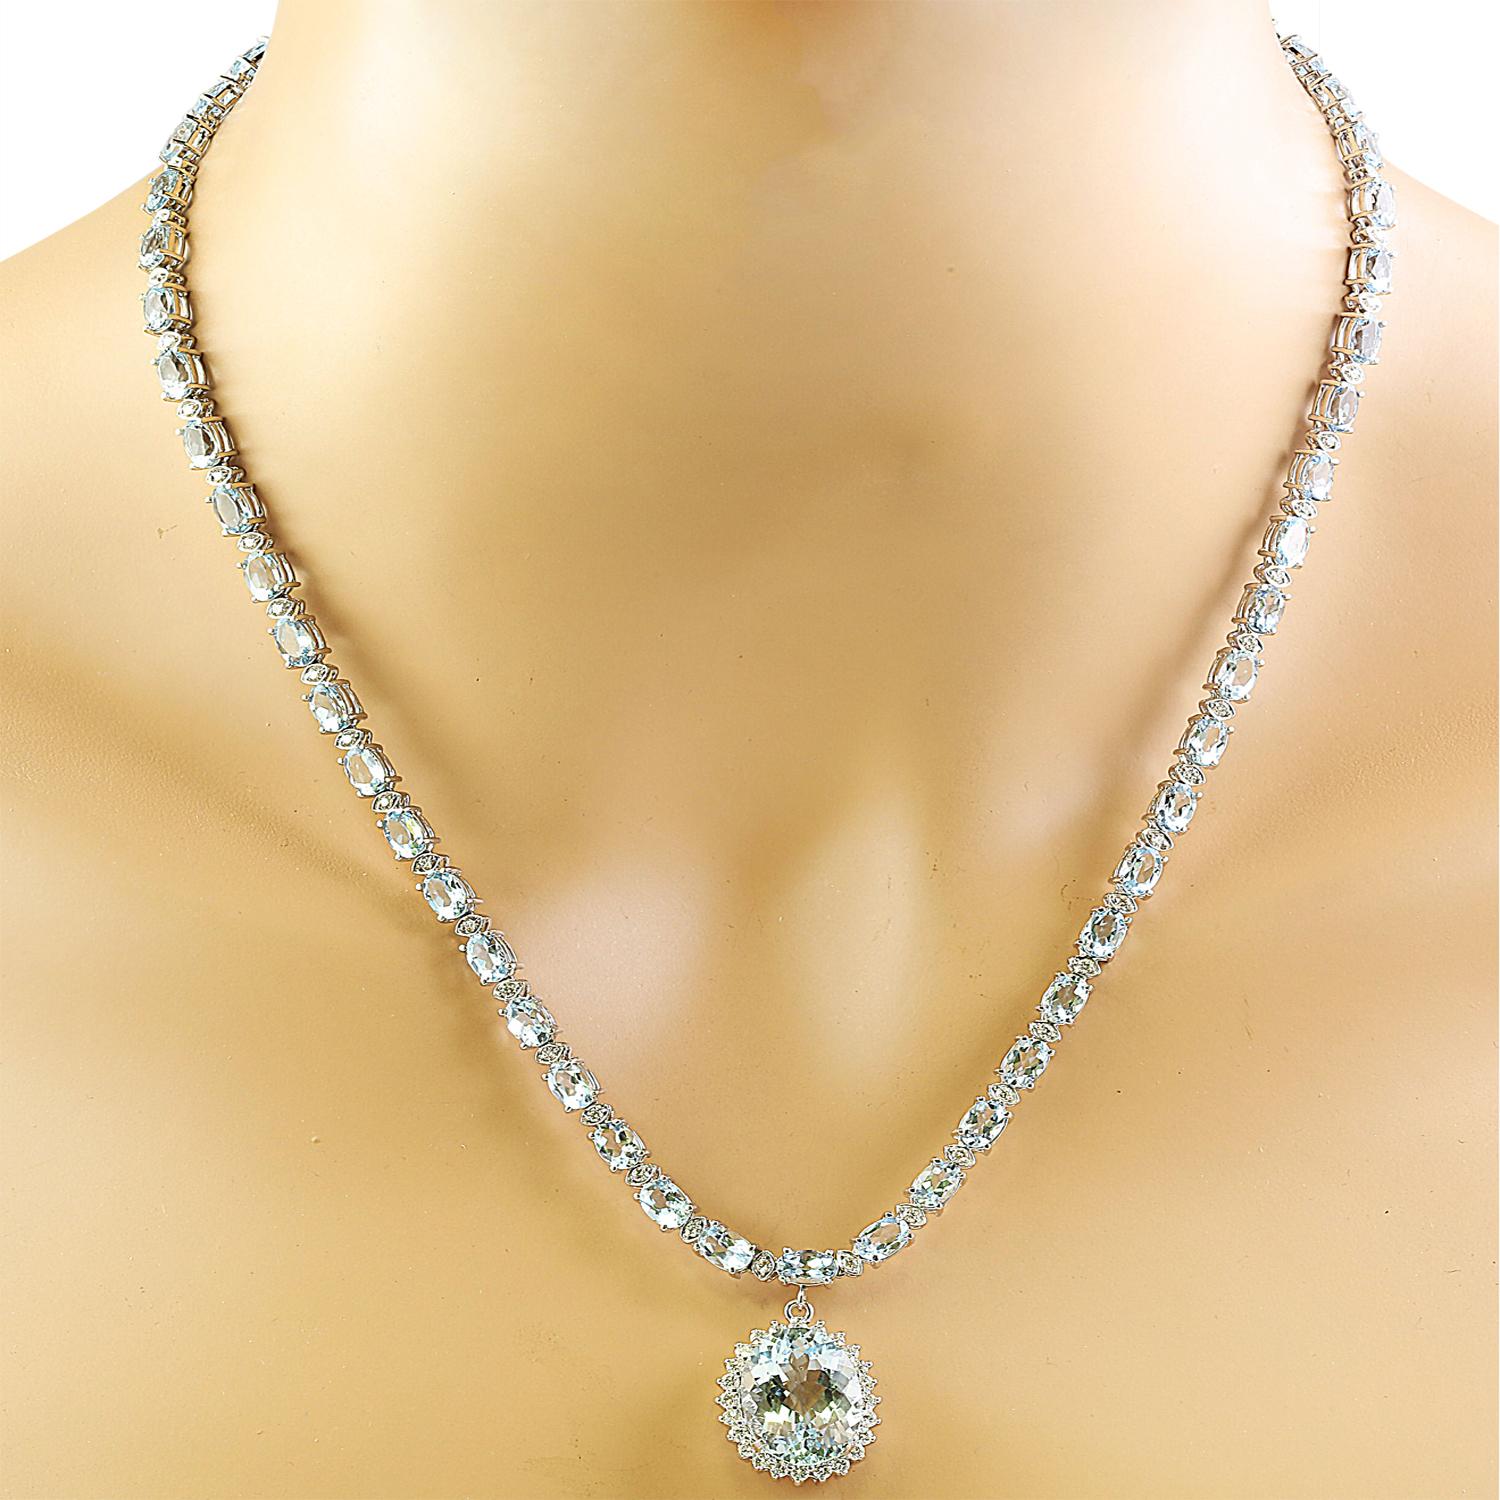 40.06 Carat Natural Aquamarine 14 Karat Solid White Gold Diamond Necklace
Stamped: 14K
Total Necklace Weight: 27.9 Grams
Necklace Length: 18 Inches
Center Aquamarine Weight: 8.87 Carat (16.00x12.00 Millimeters)
Side Aquamarine Weight 28.00 Carat